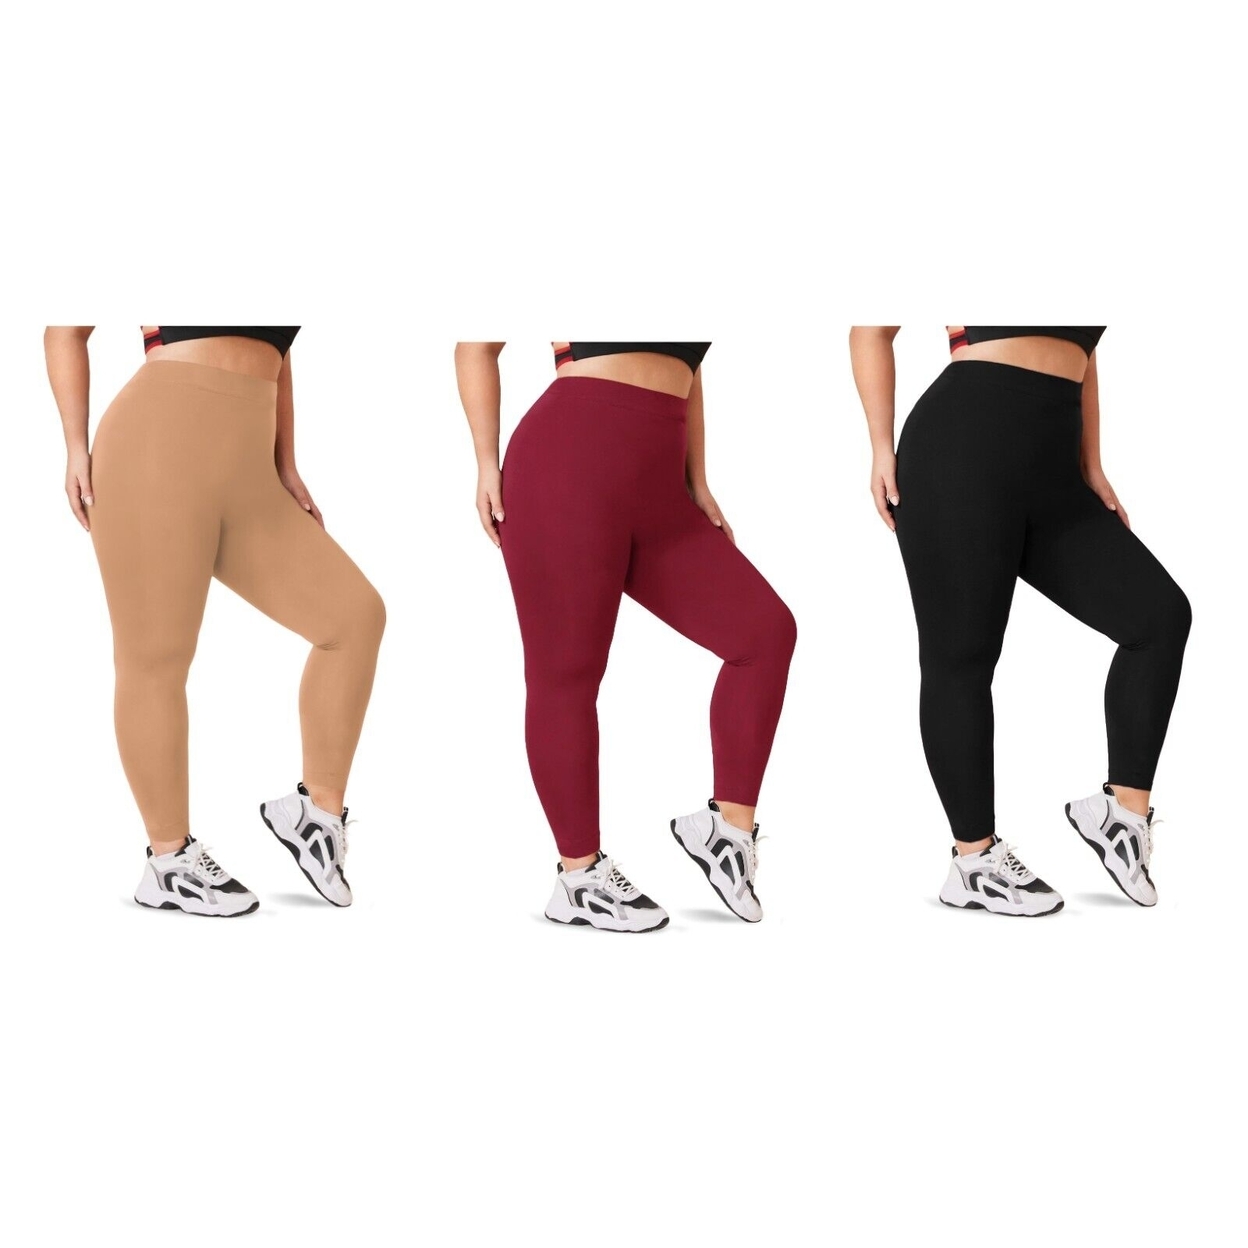 2-Pack: Women's Casual Ultra-Soft Smooth High Waisted Athletic Active Yoga Leggings Plus Size Available - Red & Red, 2x